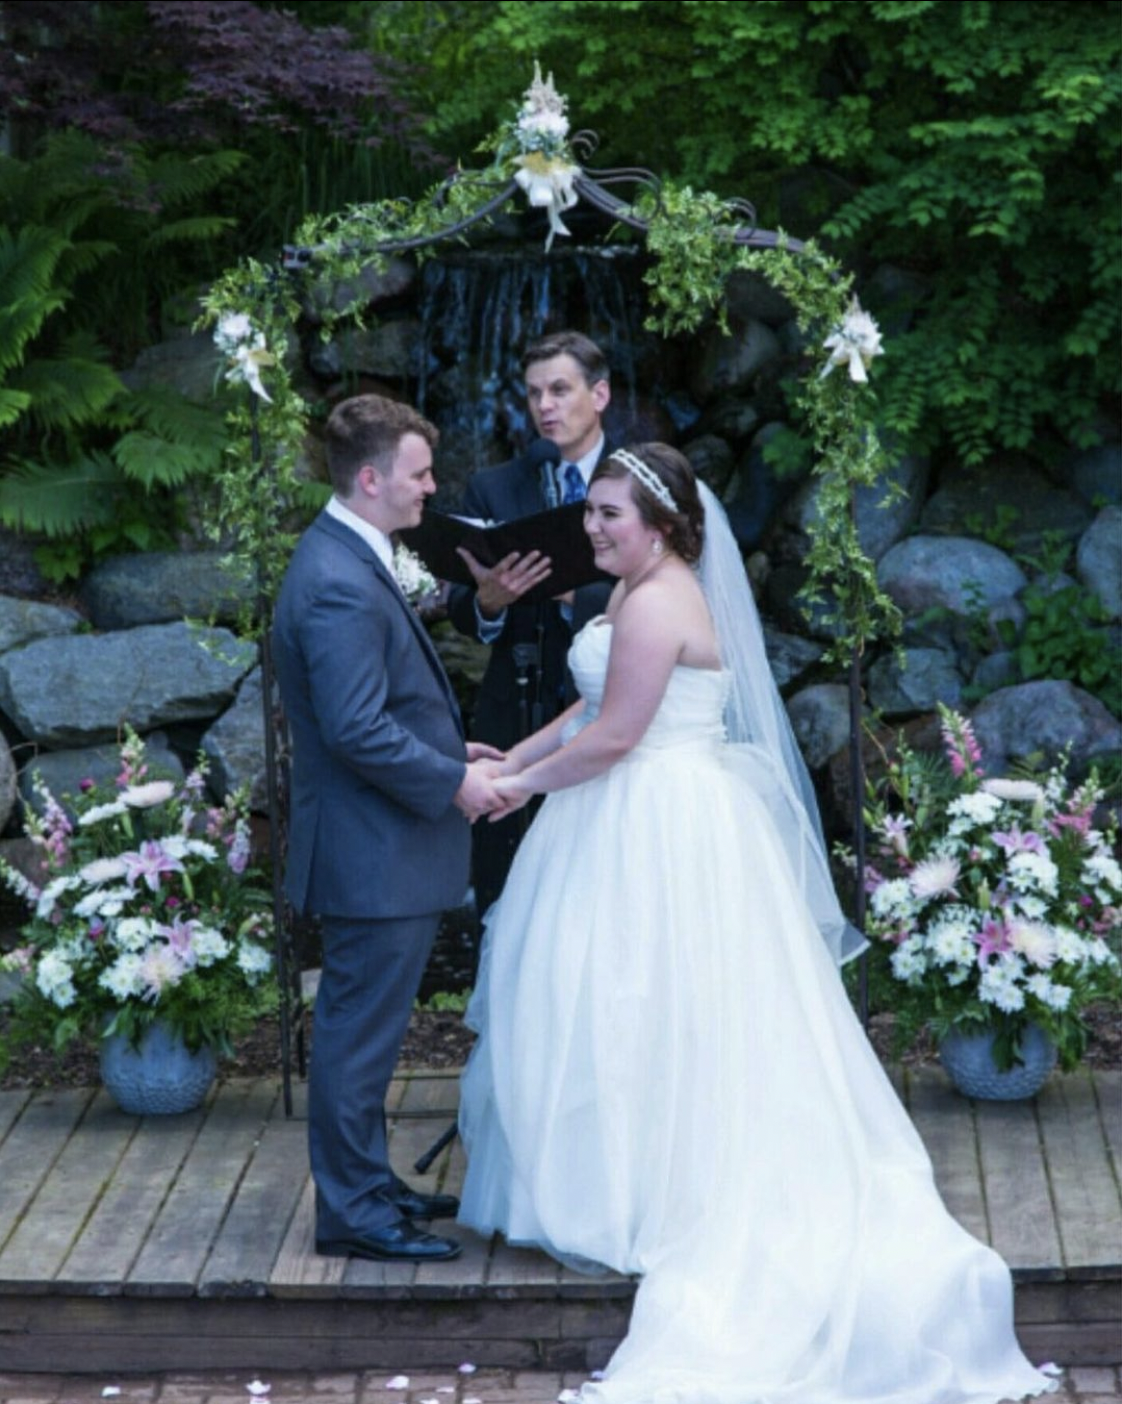 Bride and groom hold hands during outdoor wedding ceremony